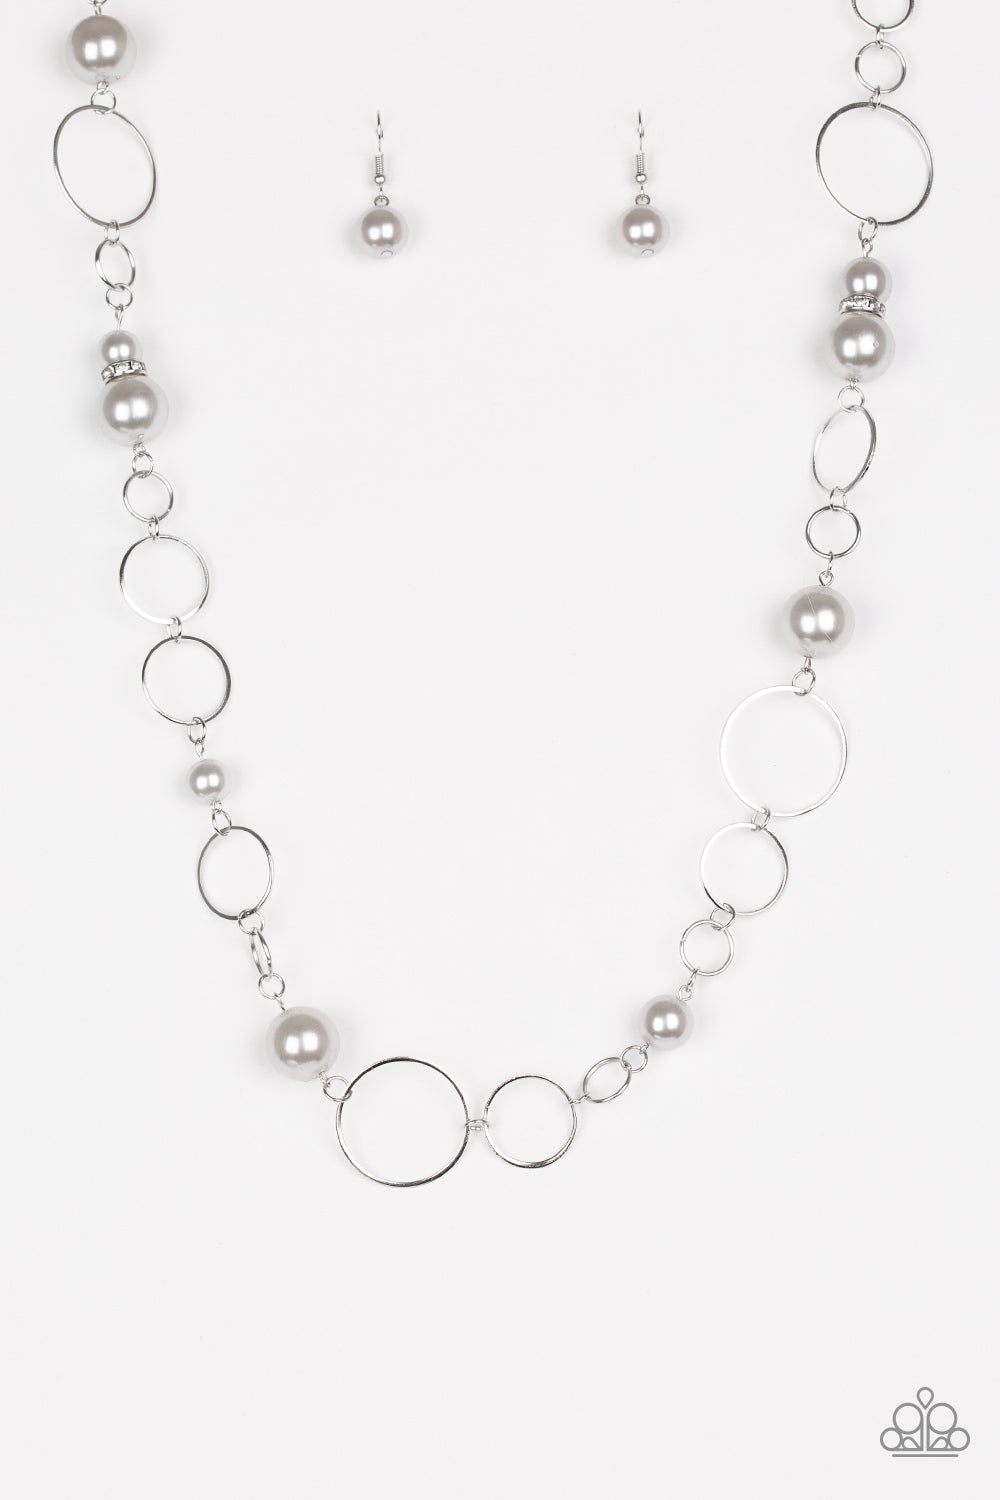 LOVELY LADY LUCK - SILVER GRAY PEARLS NECKLACE